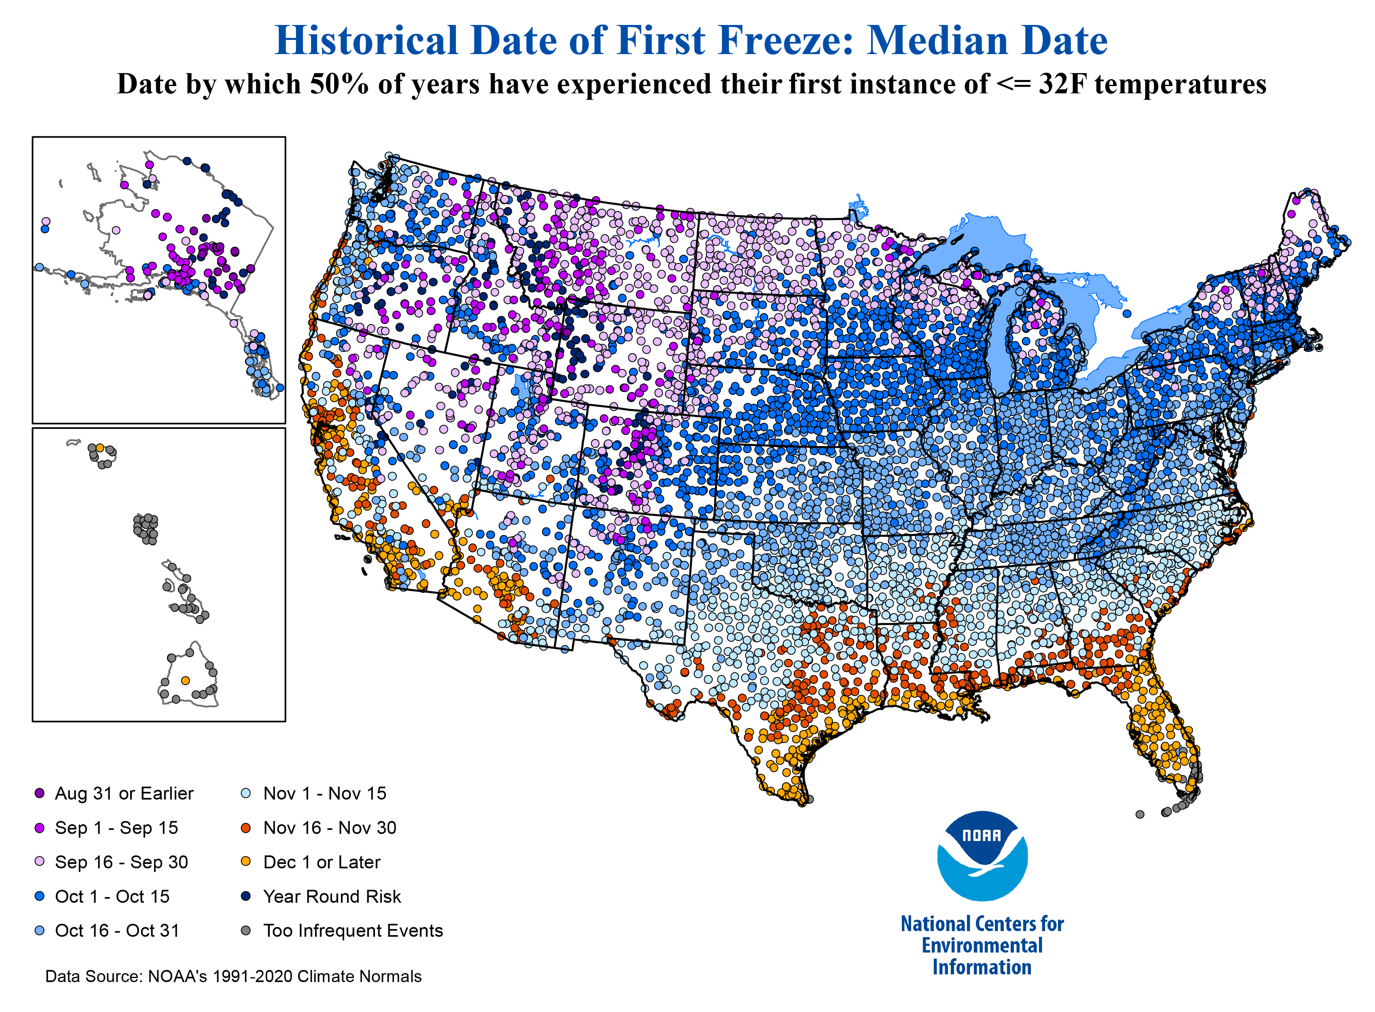 Alt text: A map of the United States with different colored dots and coordinating key to graph the average date of the first fall freeze based on location.